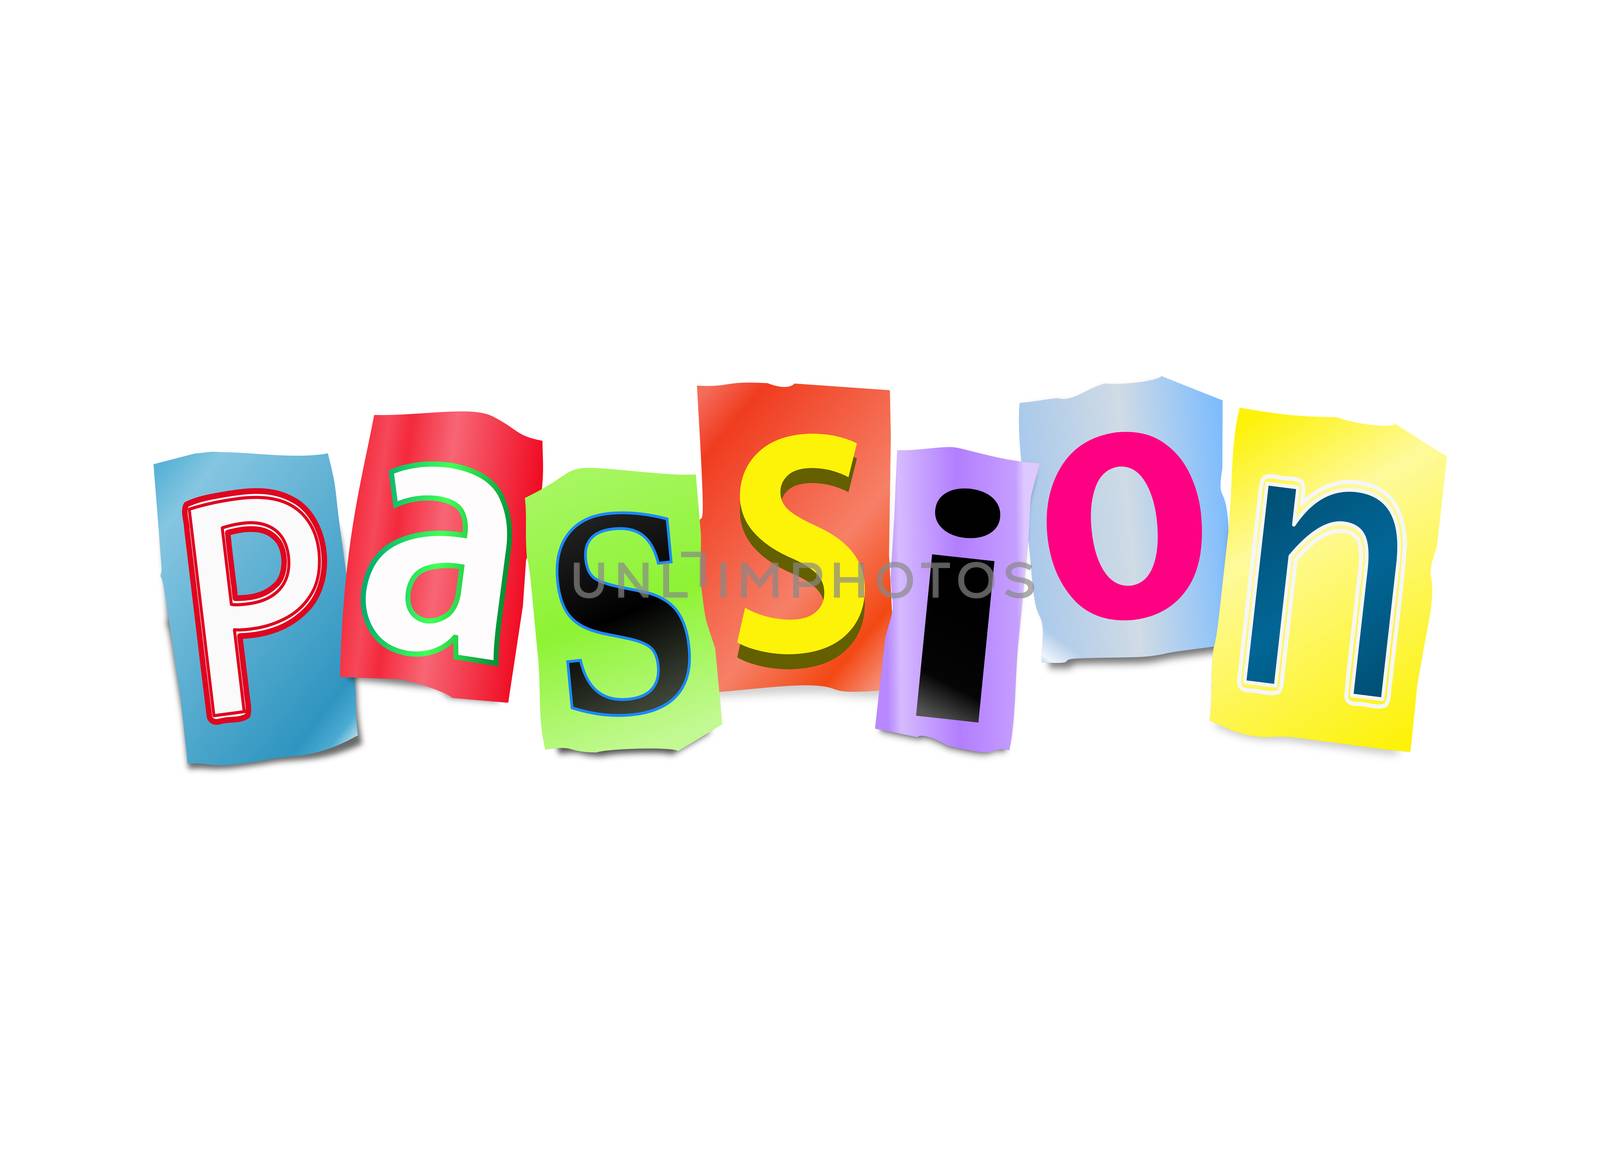 Illustration depicting a set of cut out printed letters arranged to form the word Passion.